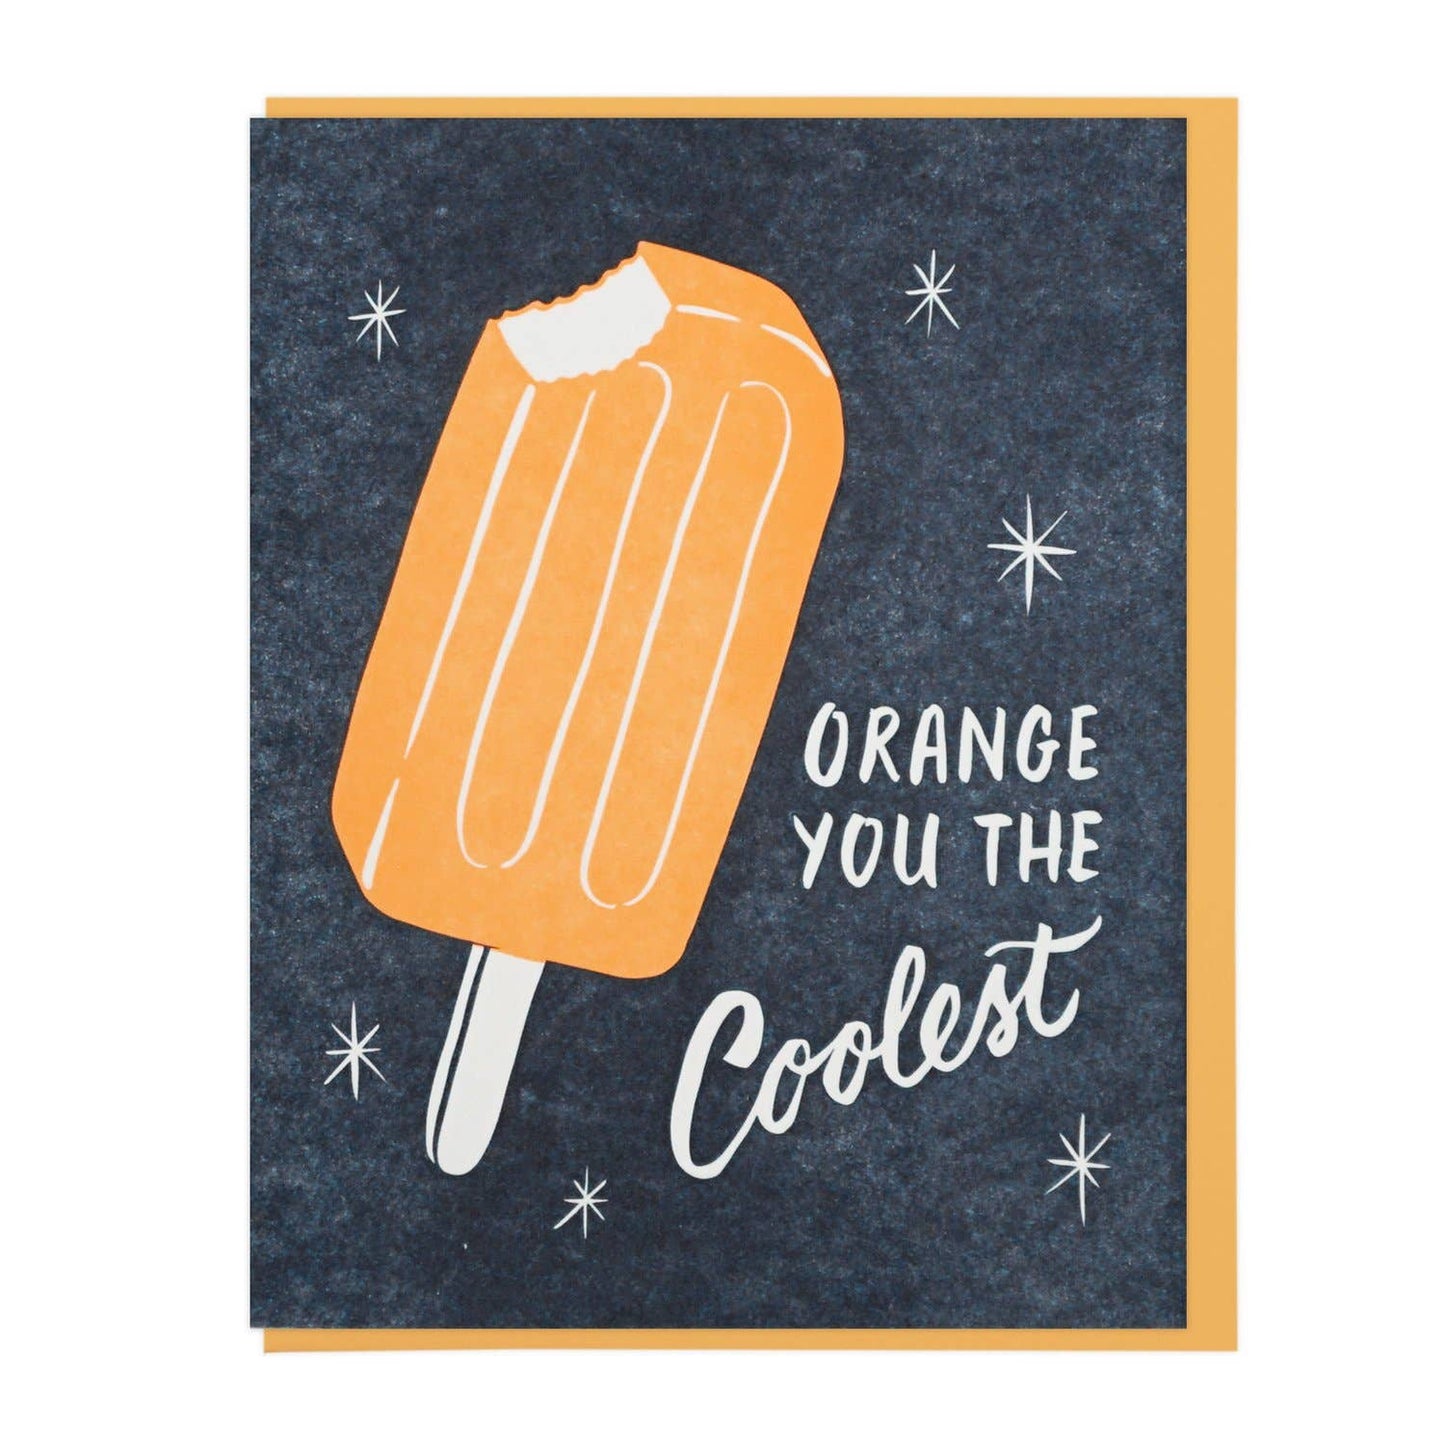 Coolest Creamsicle